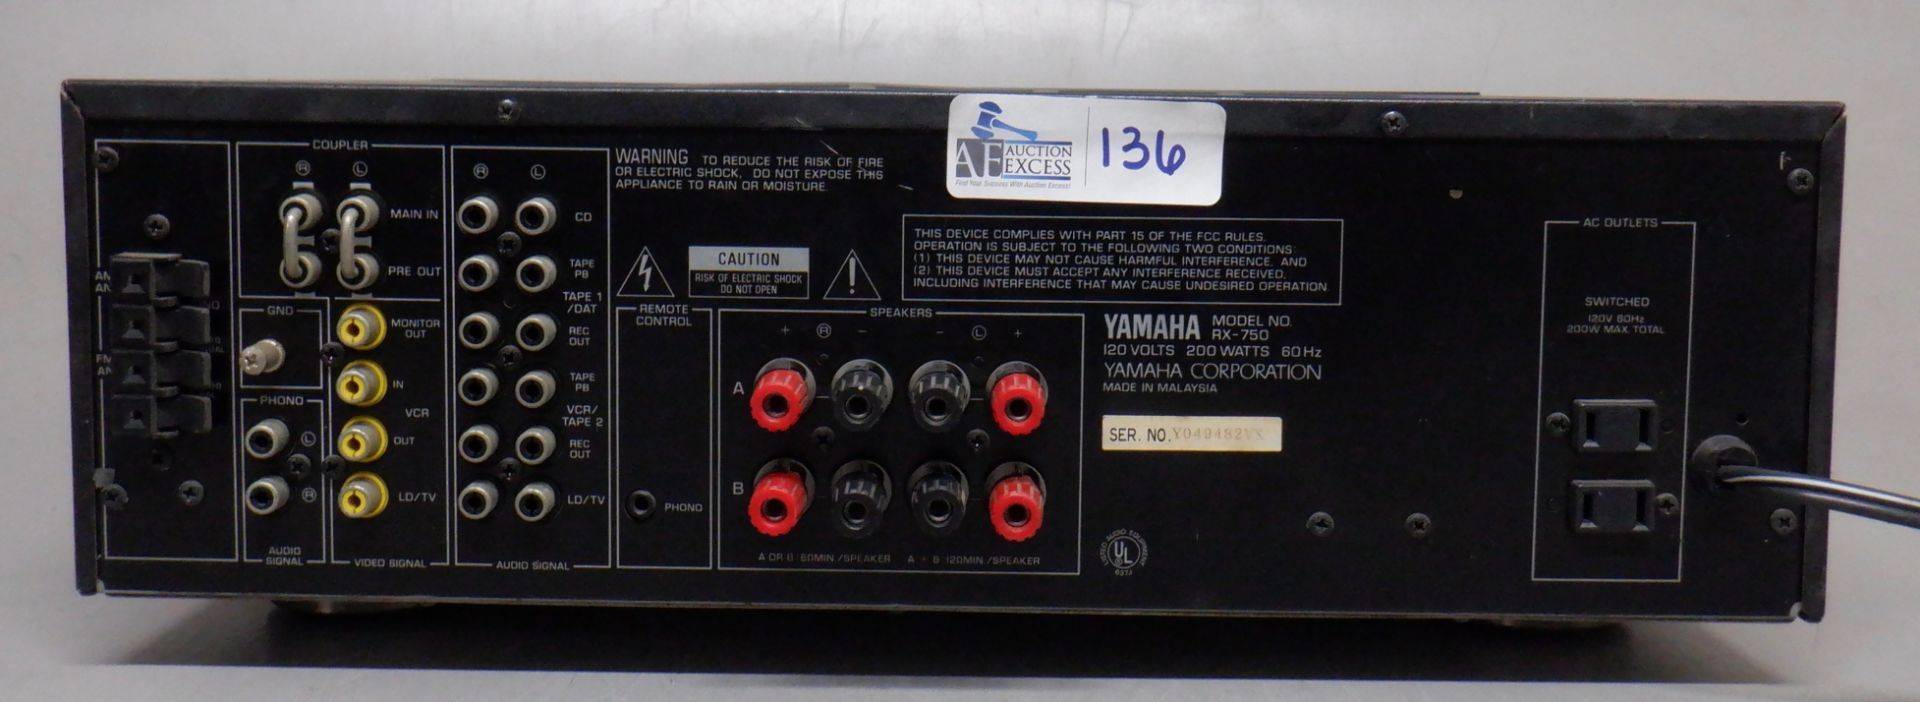 YAMAHA RX-750 STEREO RECEIVER - Image 2 of 2